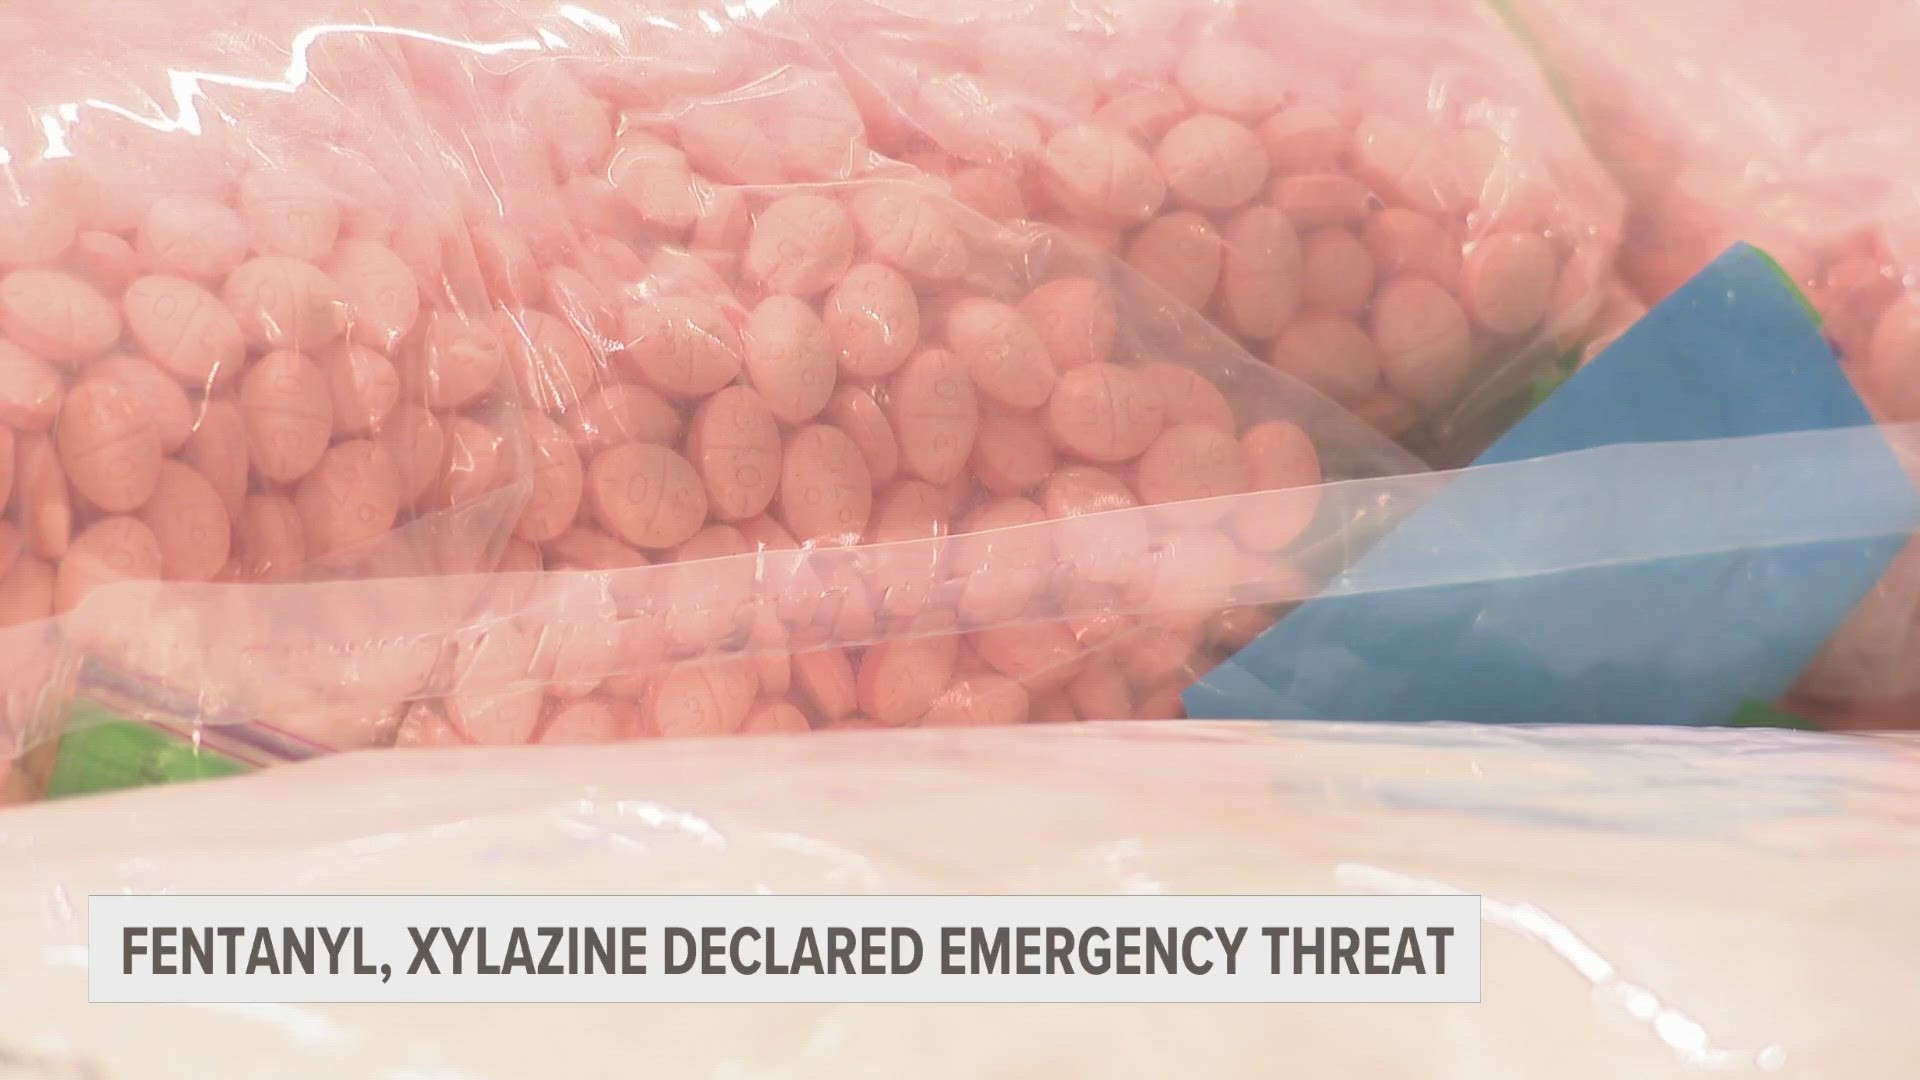 Xylazine is an easily accessible animal tranquilizer and has effects similar to opioids.